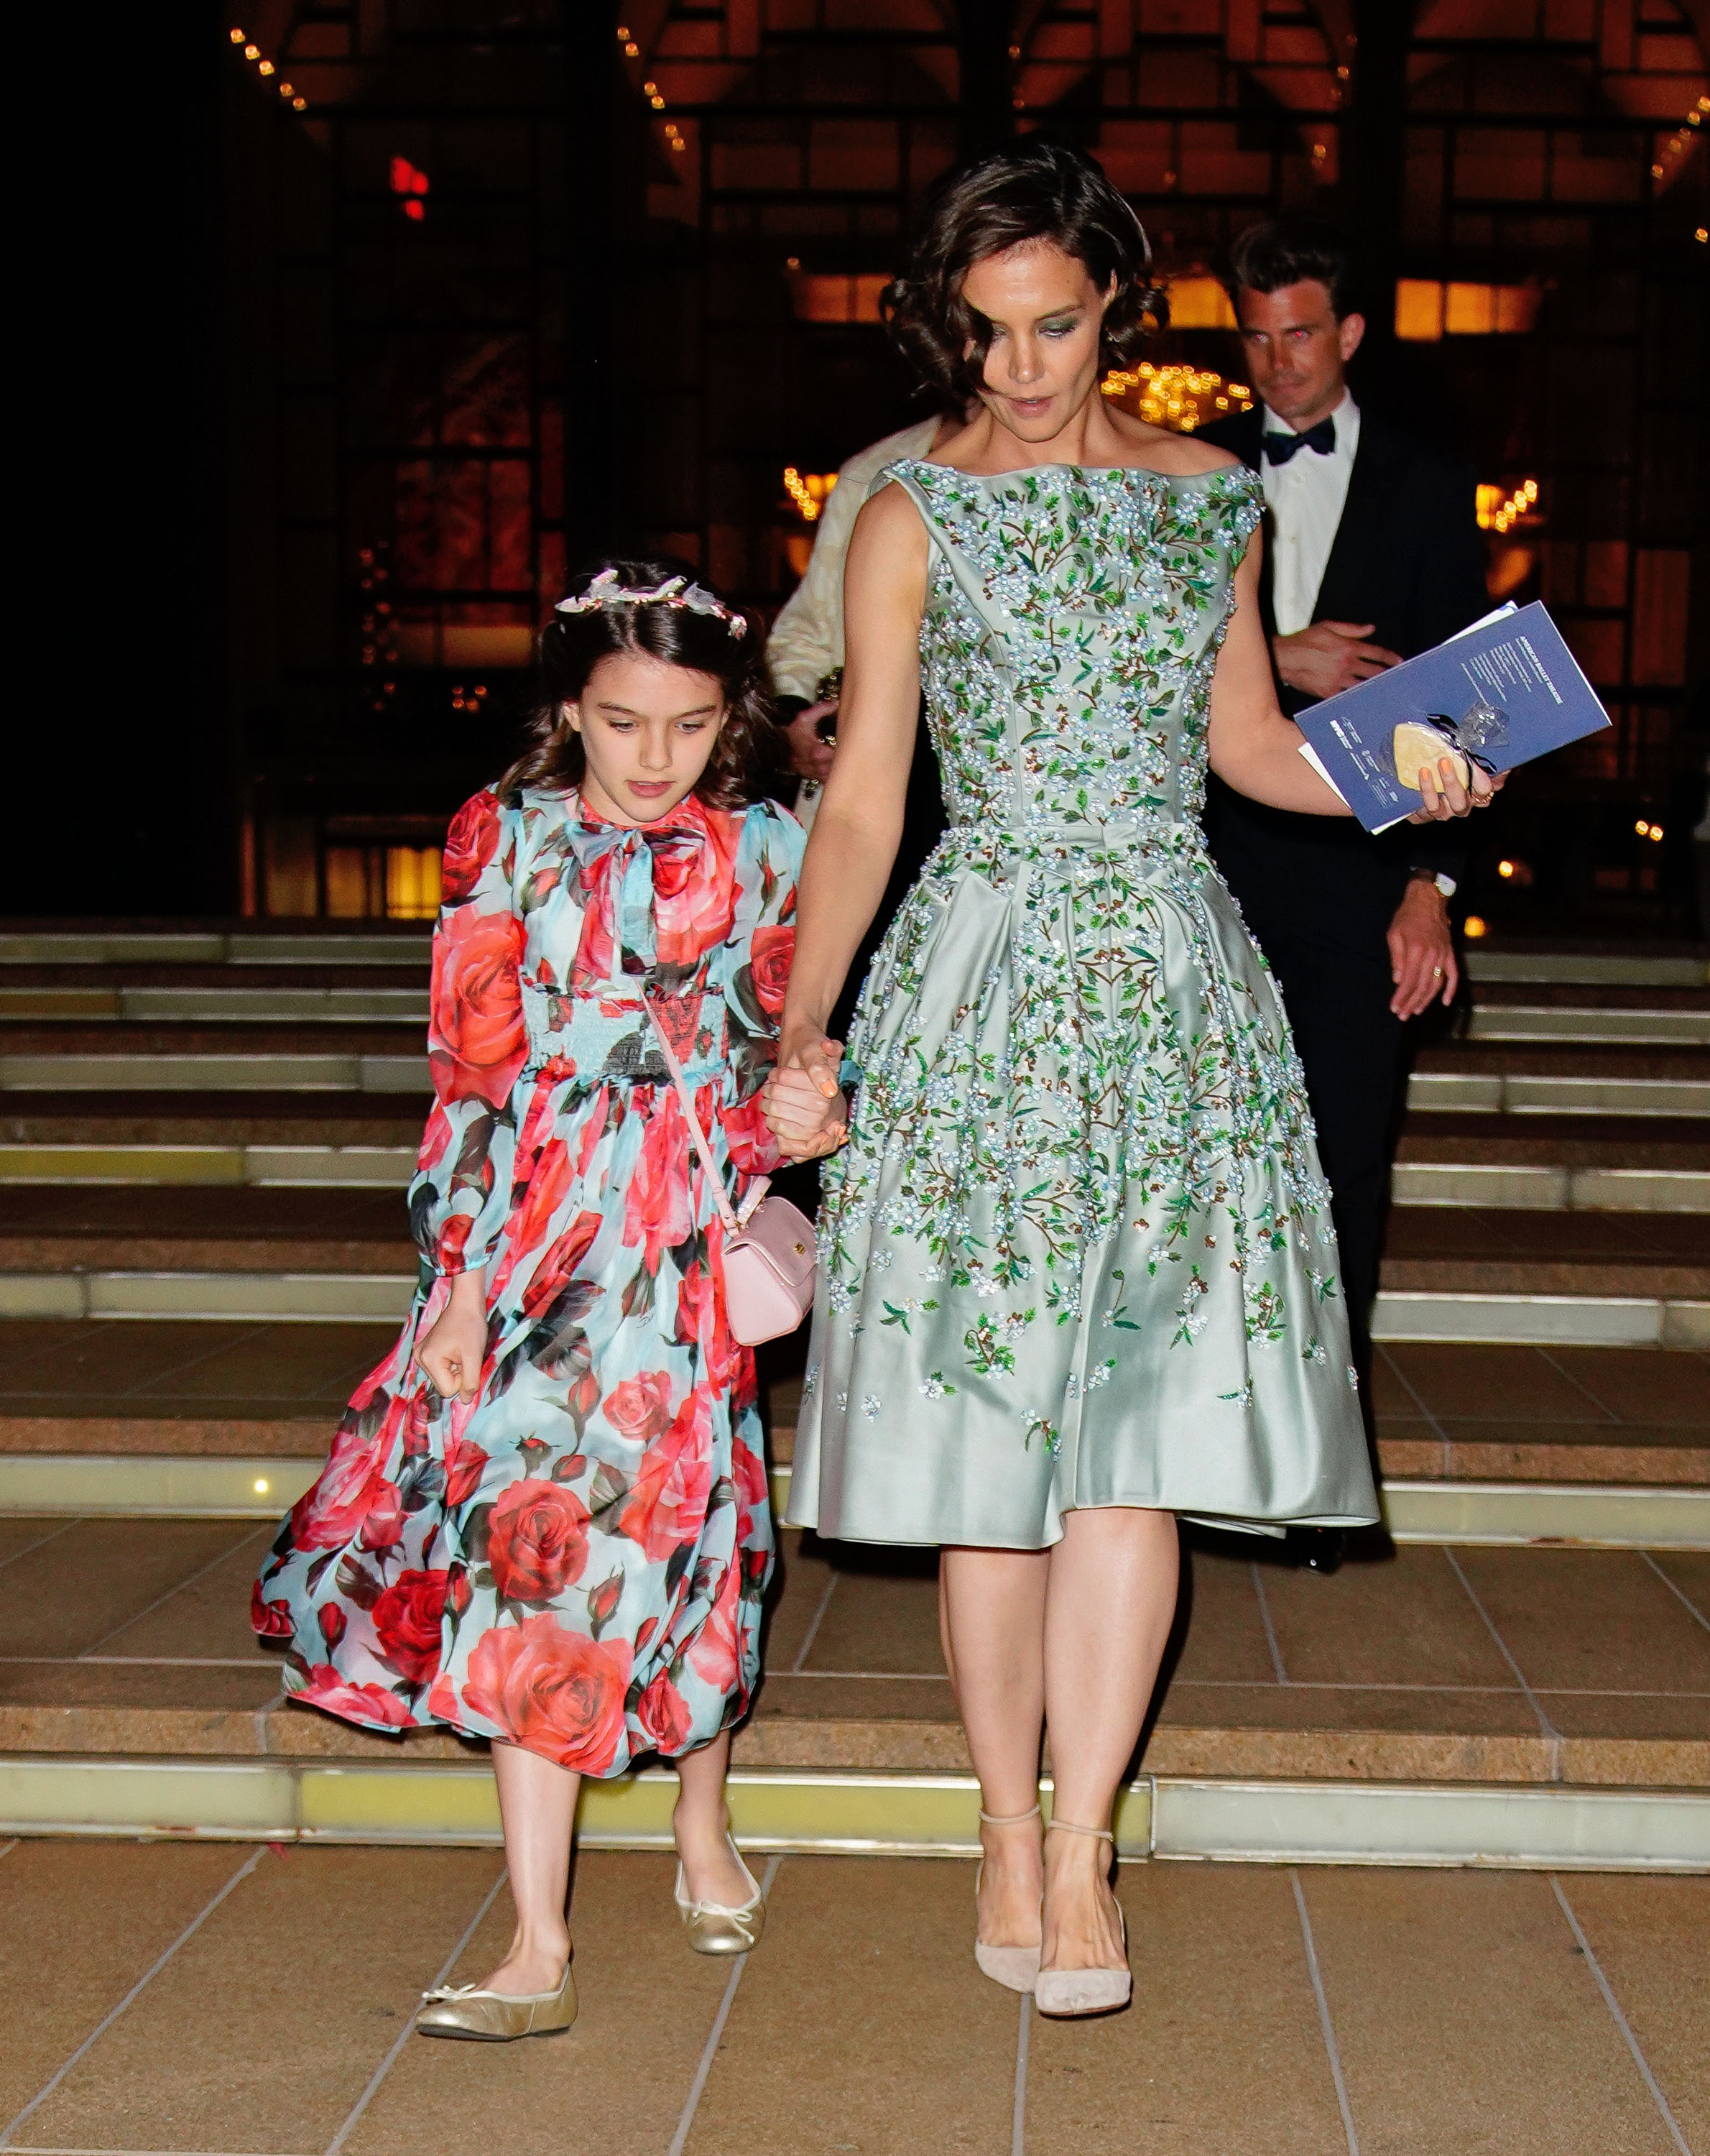 Katie Holmes and Suri Cruise enjoying a night at American Ballet Theater at Lincoln Center in New York City, on May 21, 2018 | Source: Getty Images